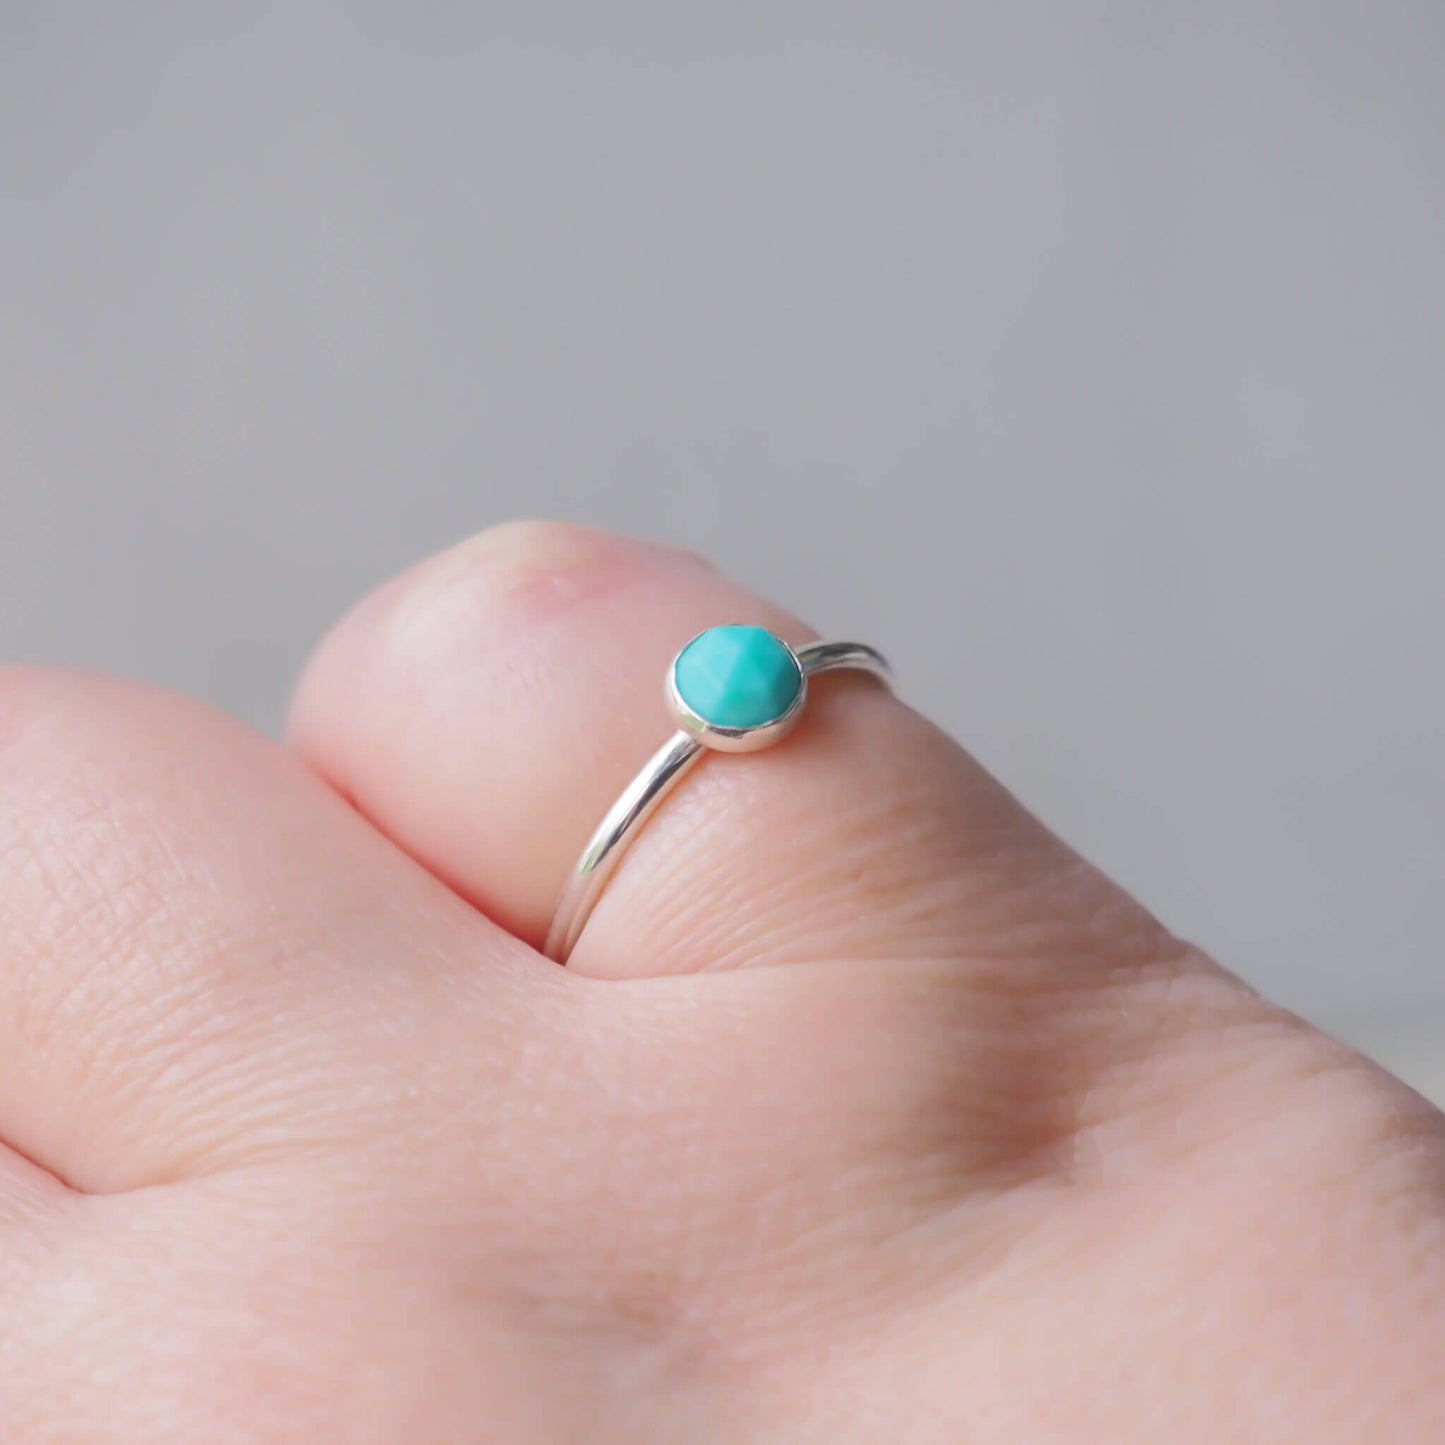 silver and turquoise solitaire ring worn on hand, Handmade in Scotland by maram jewellery